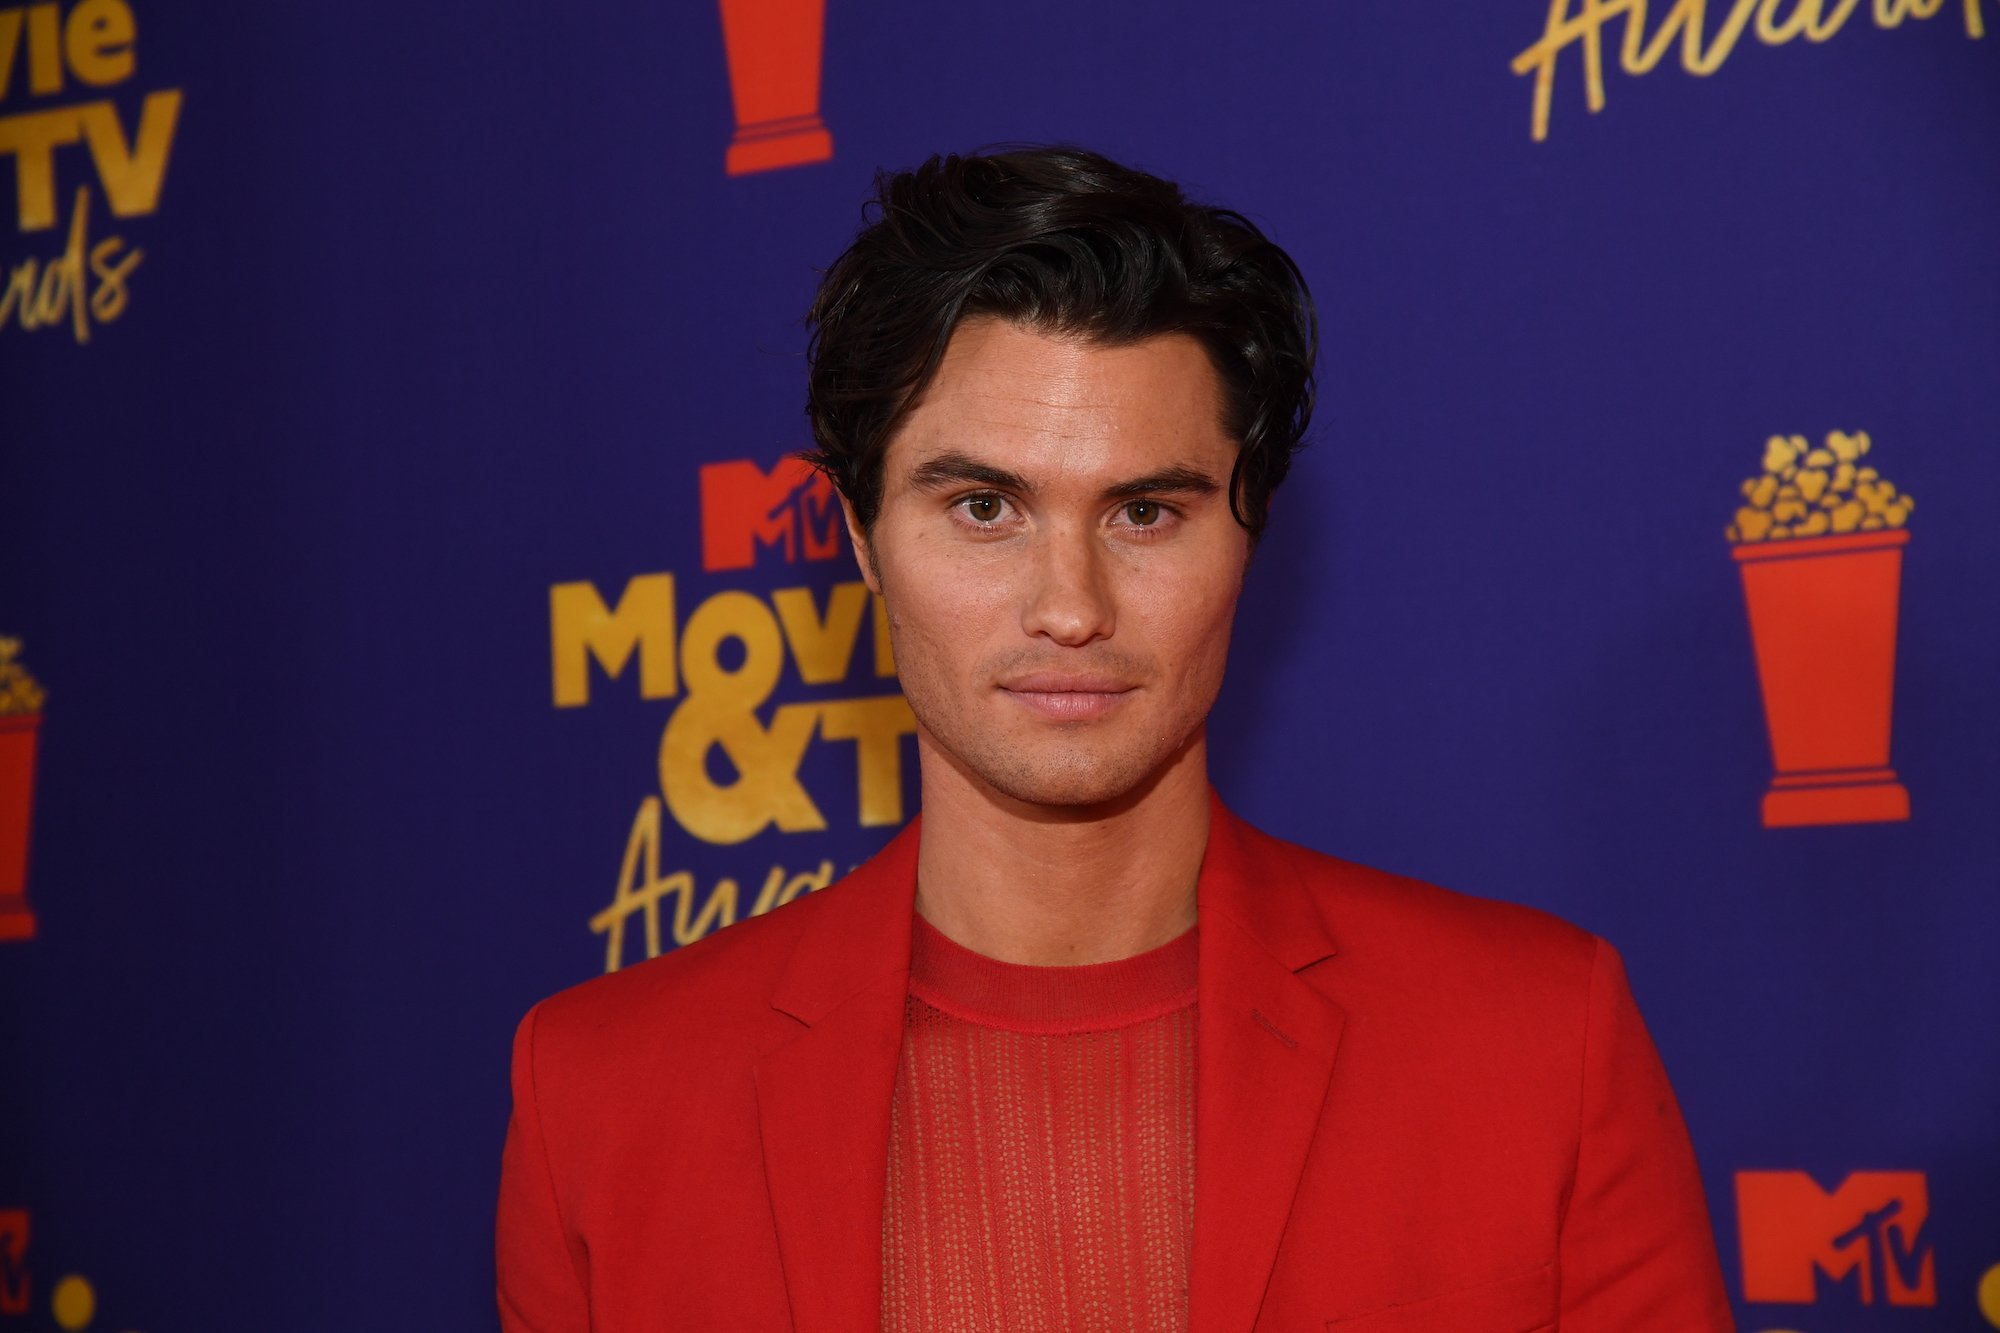 Chase Stokes attending the 2021 MTV Movie & TV Awards